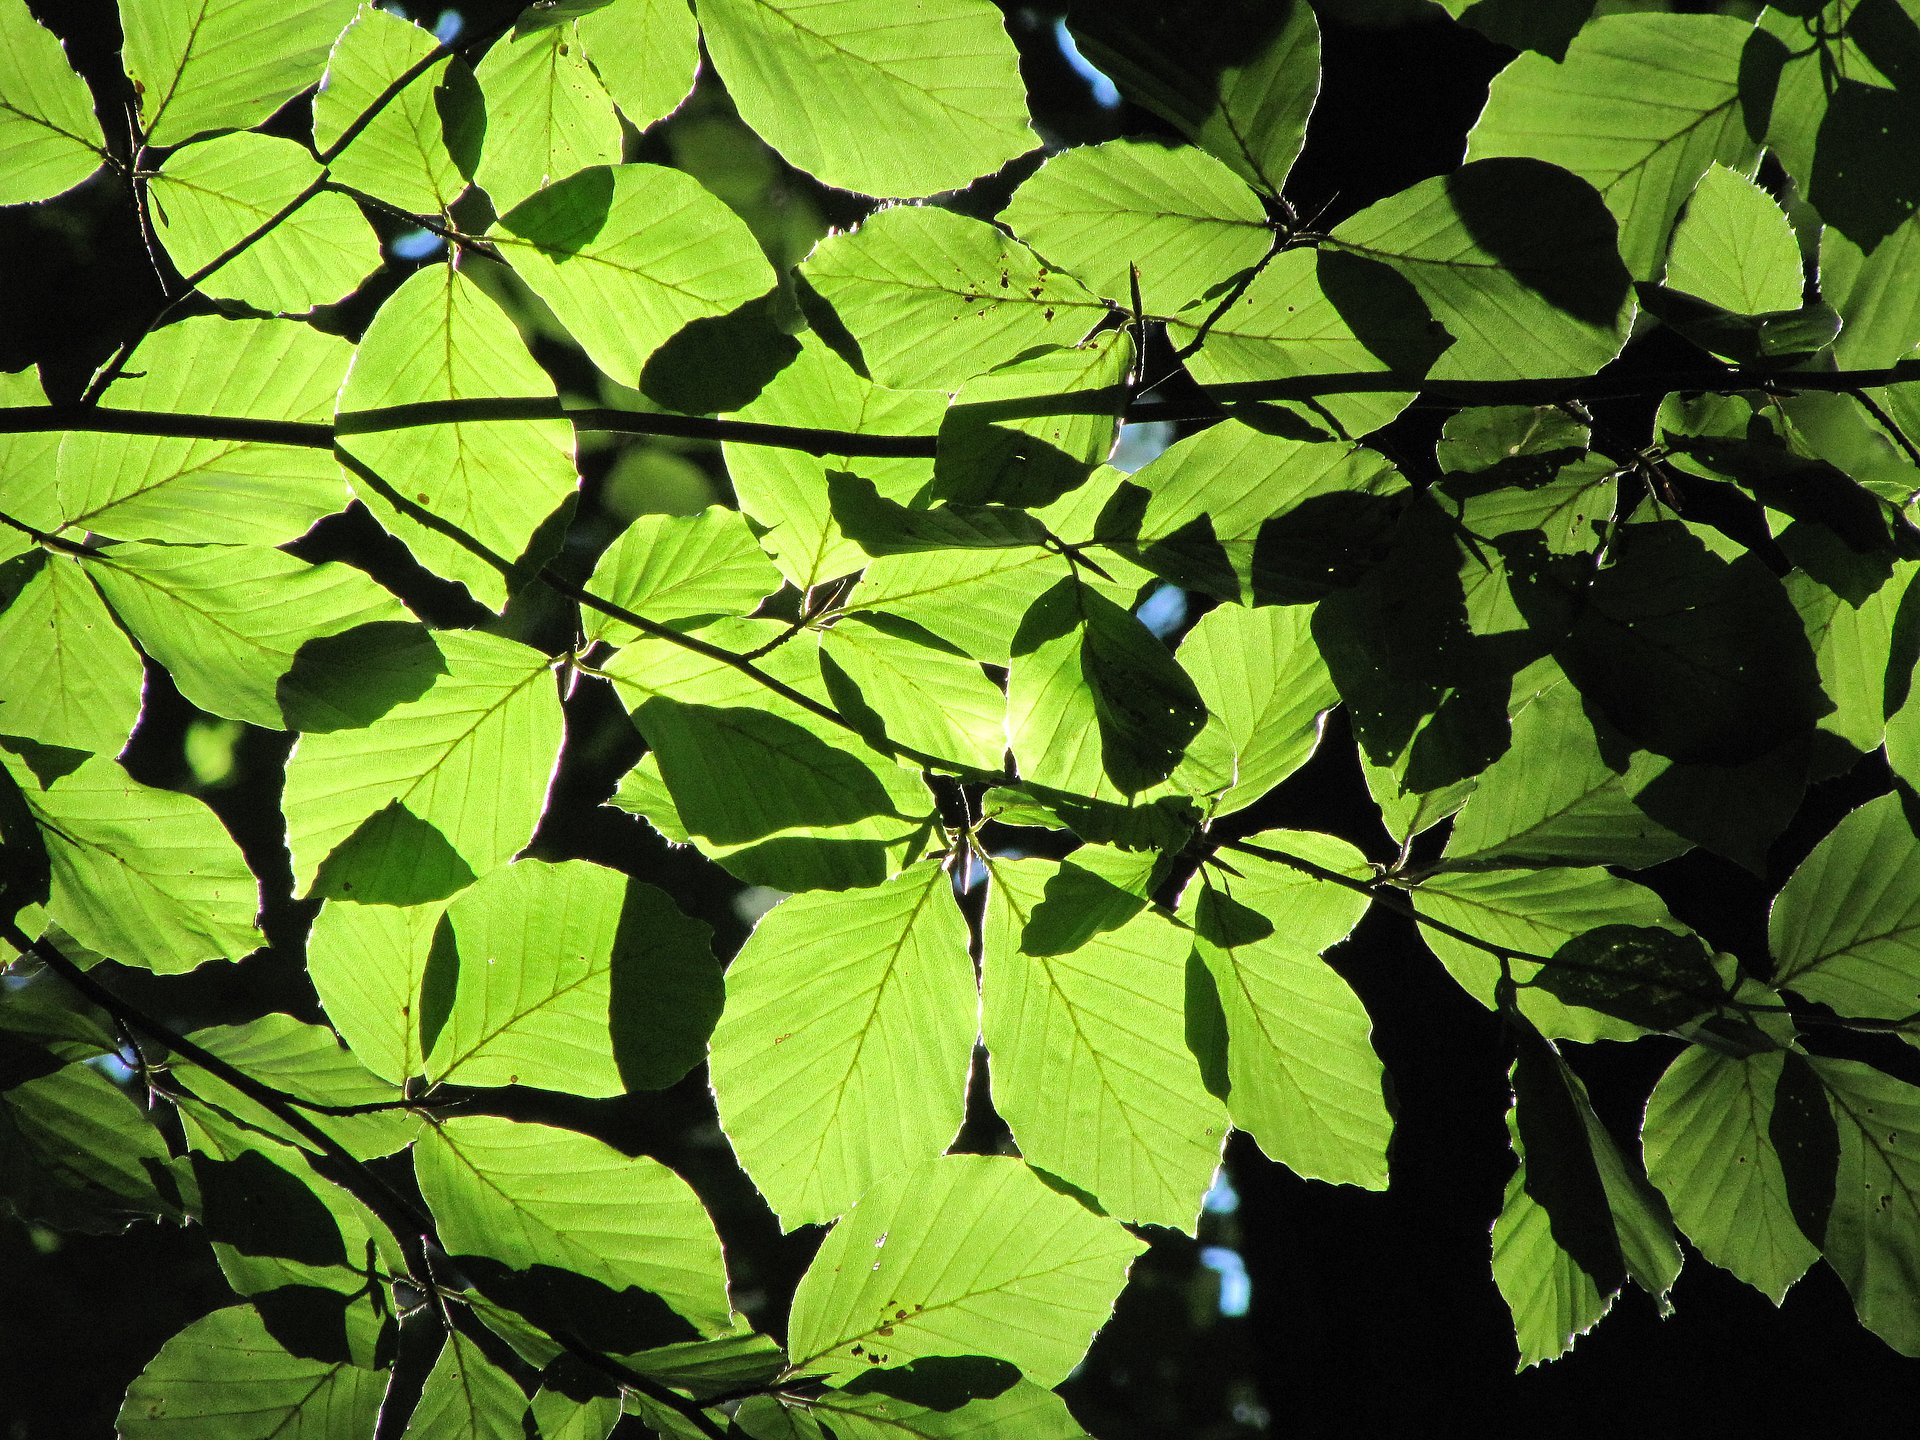 The international researchers investigated the change in the sensitivity of leaf unfolding to climate warming using observations for dominant European tree species like this beech. (Photo: Stefanie Ederer)